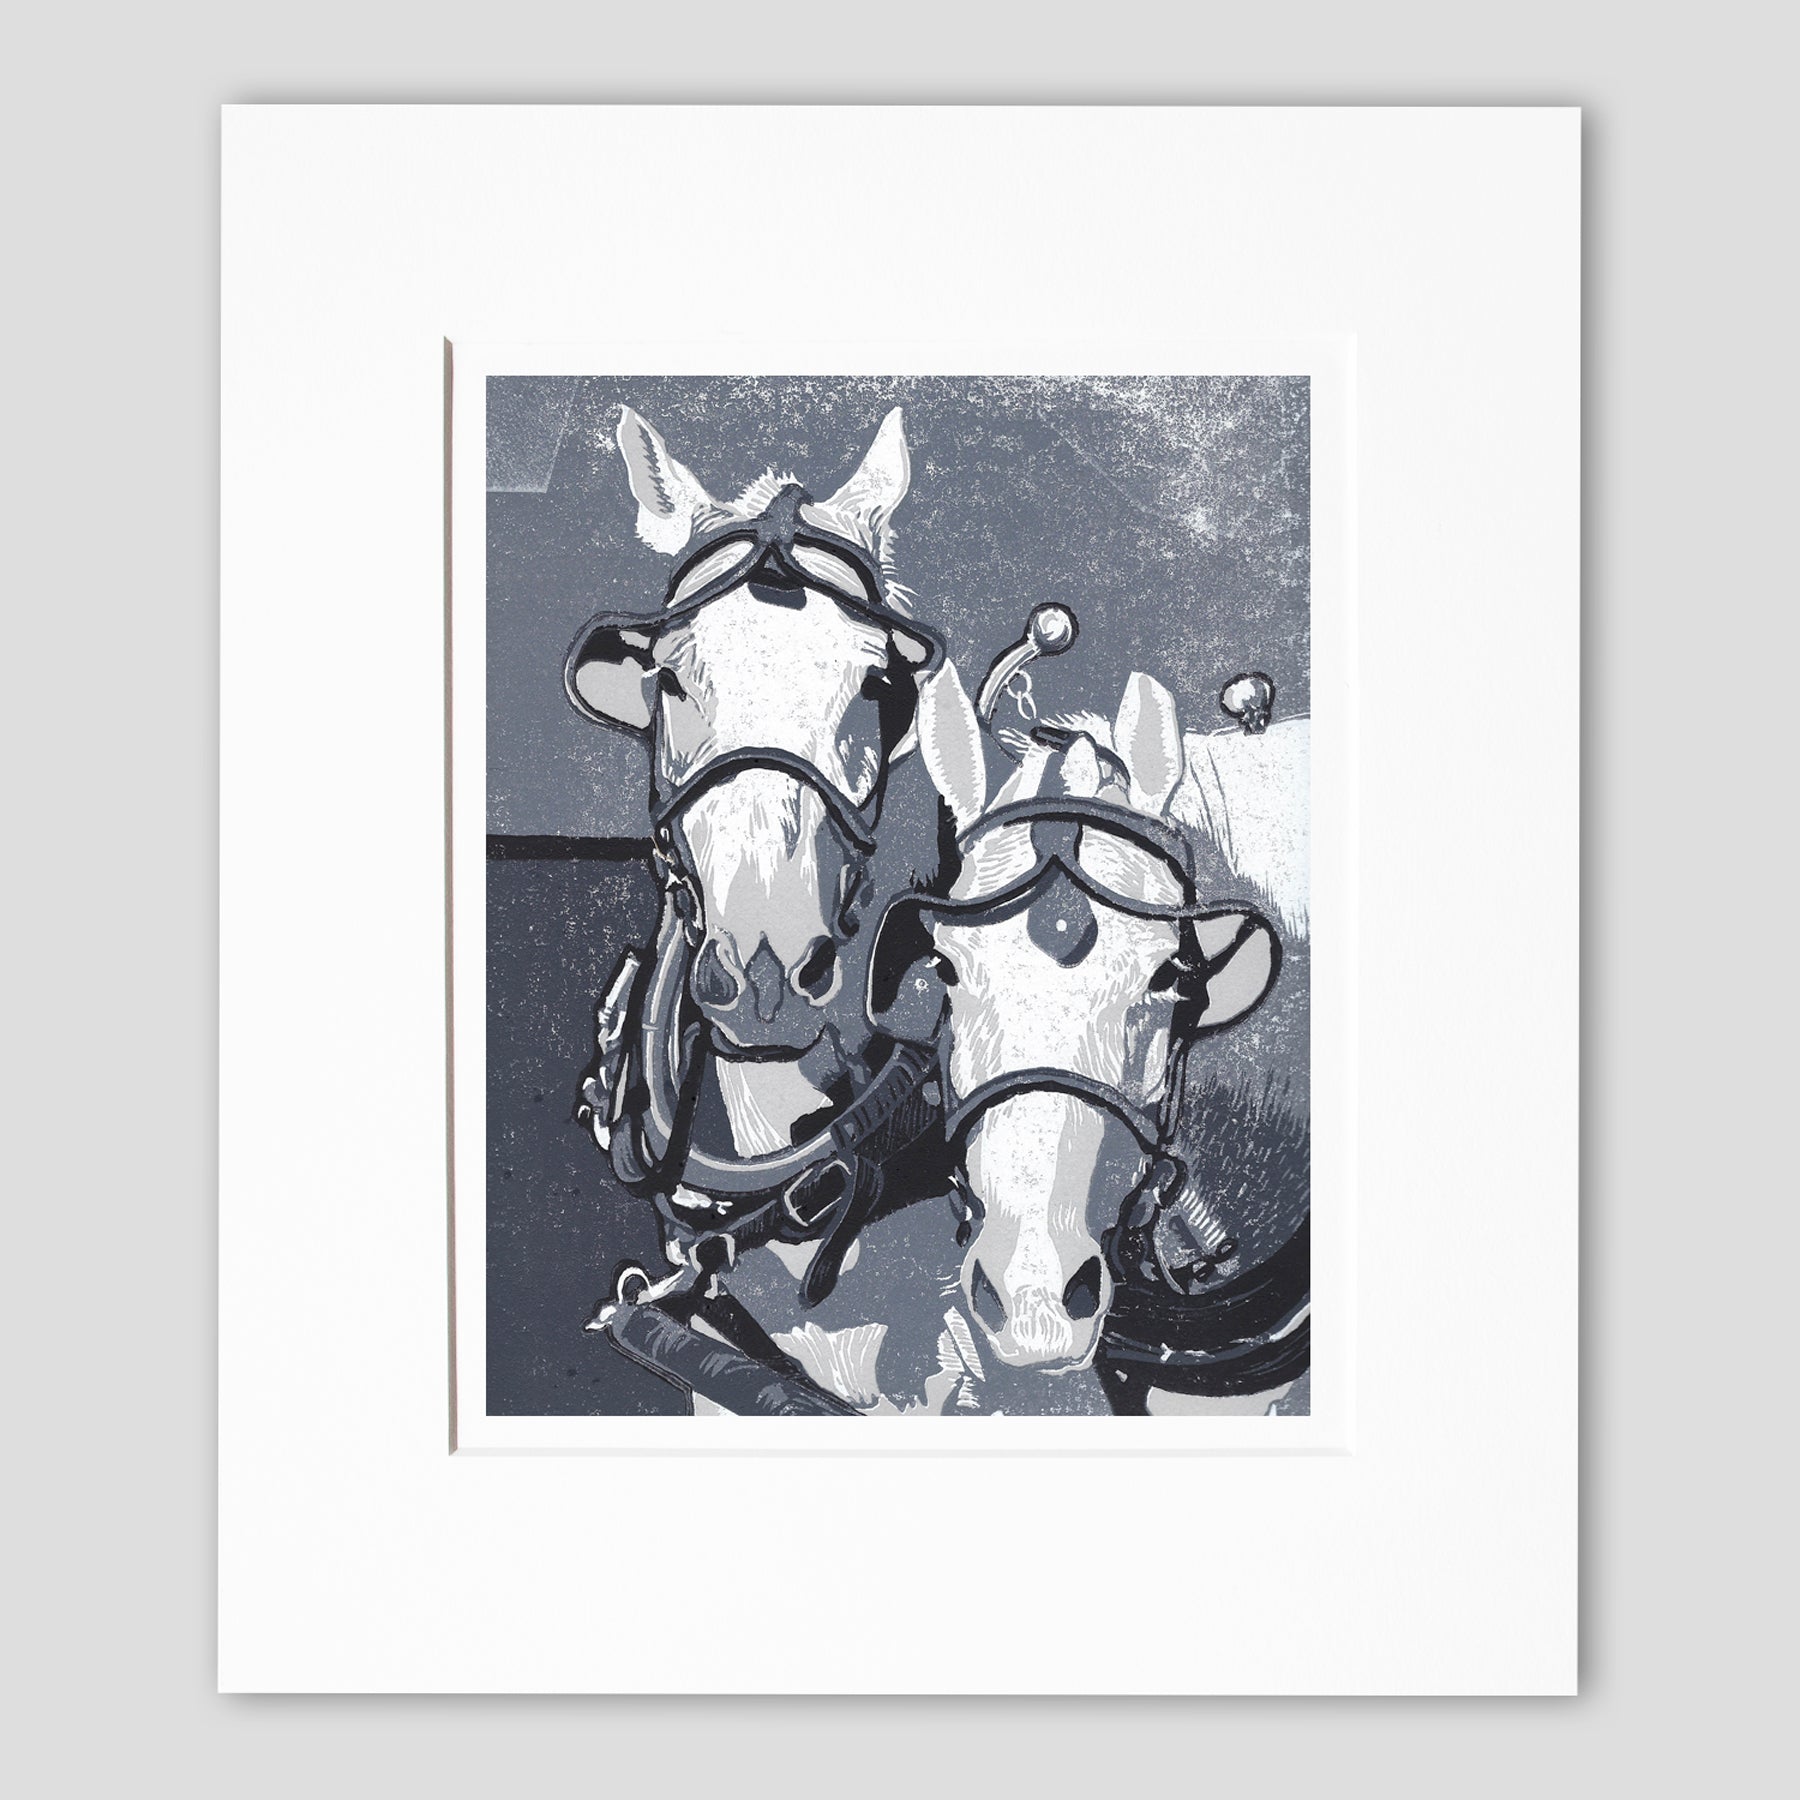 Horse art created by Natalia Wohletz of Peninsula Prints.  Based upon the Percherons of Mackinac Island, this original block print titled Two Horse Team speaks to the strength and beauty of horses. 